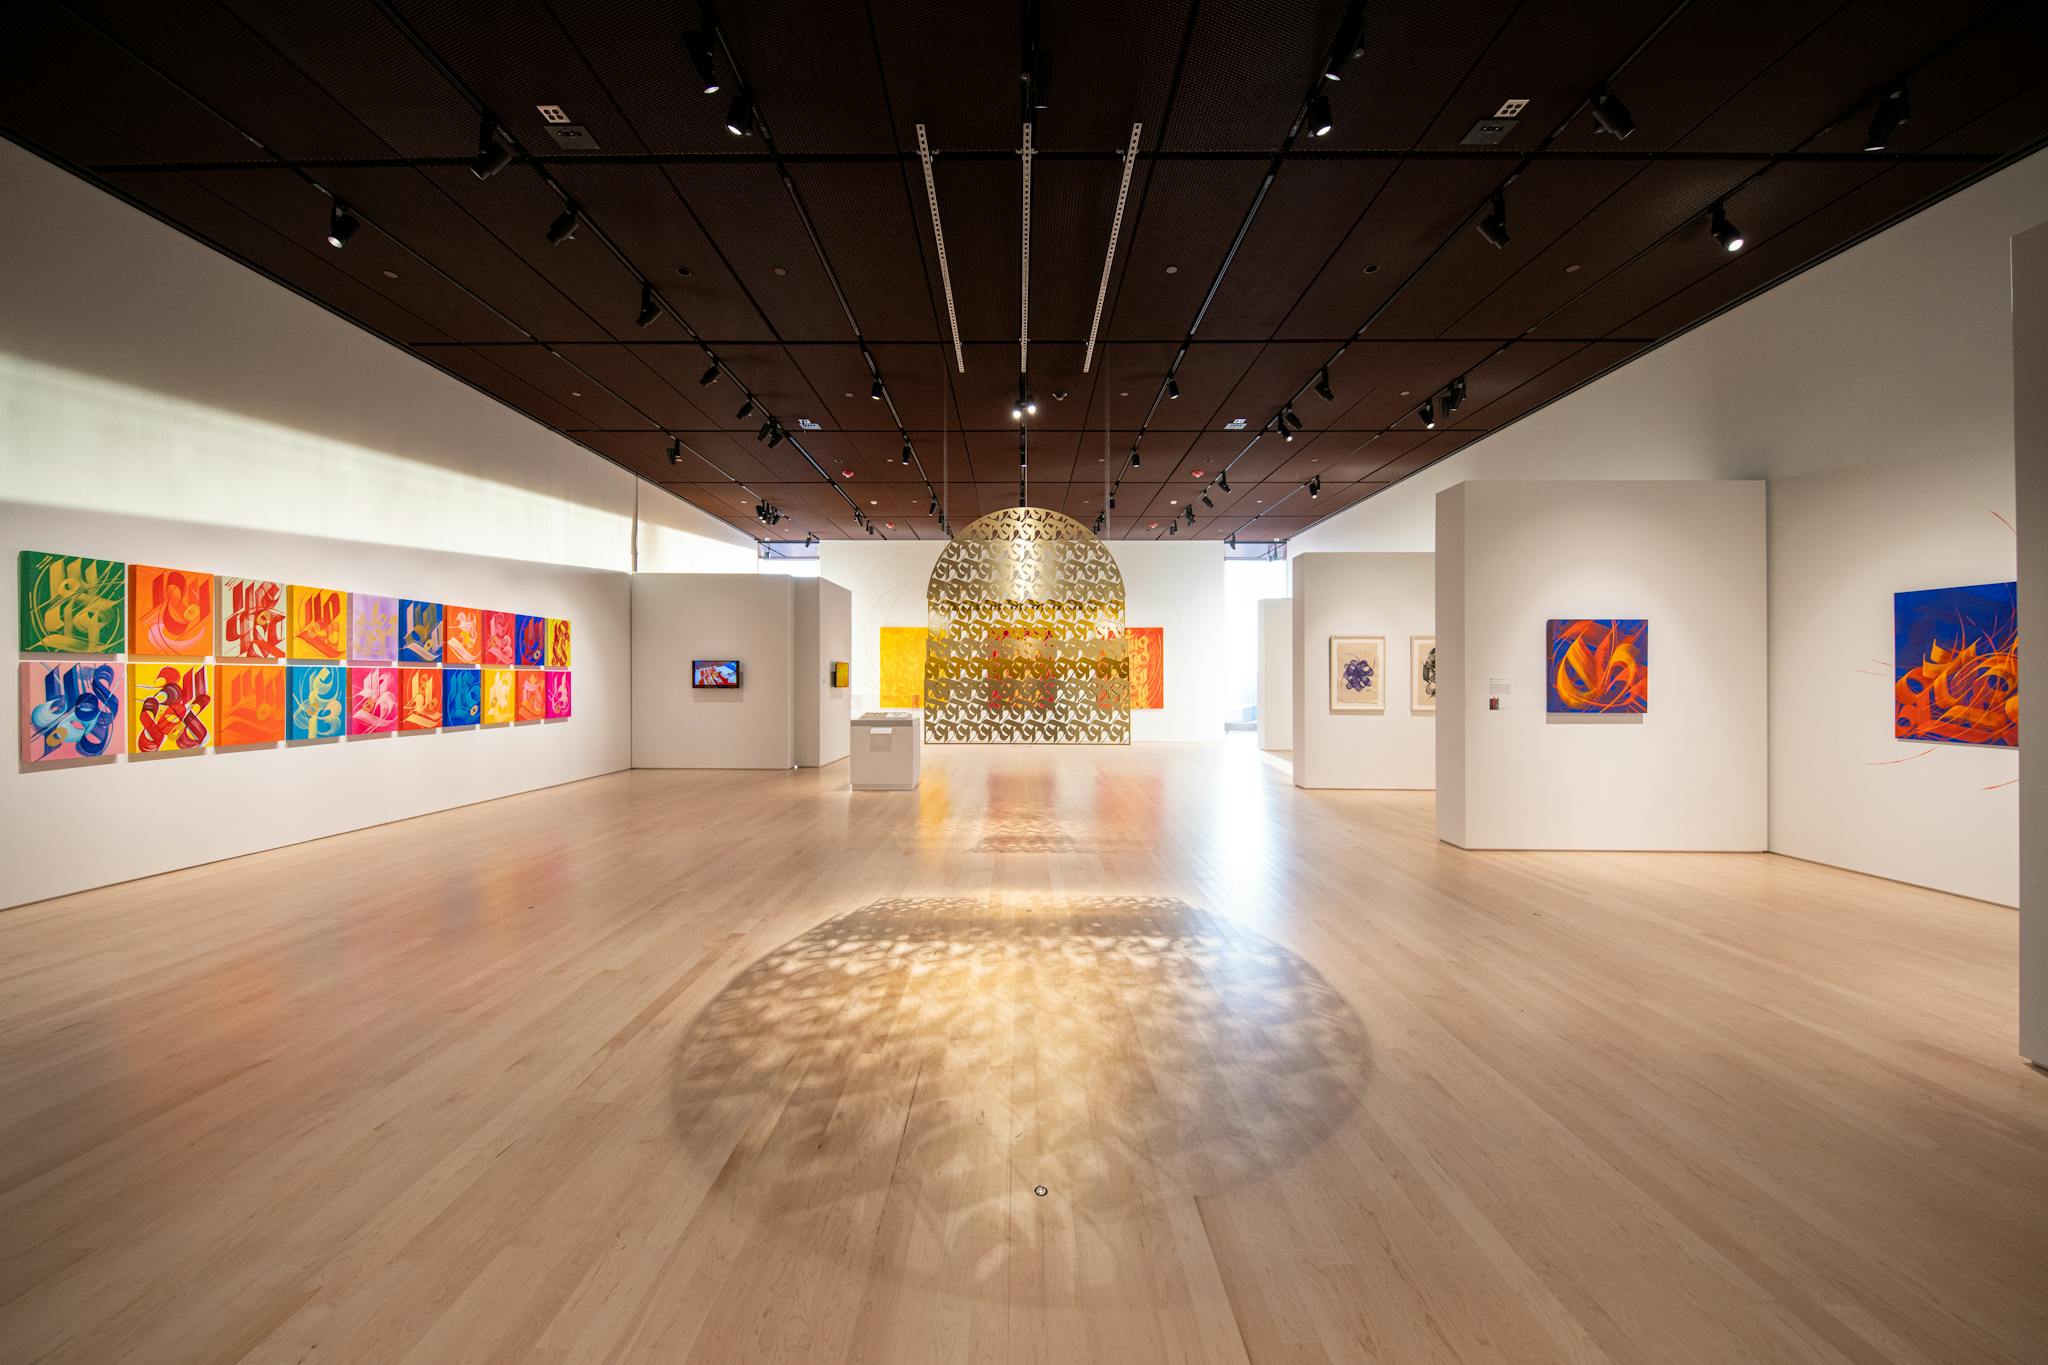 An expansive view of the Cantor Art Gallery with Sneha Shrestha's works on display.